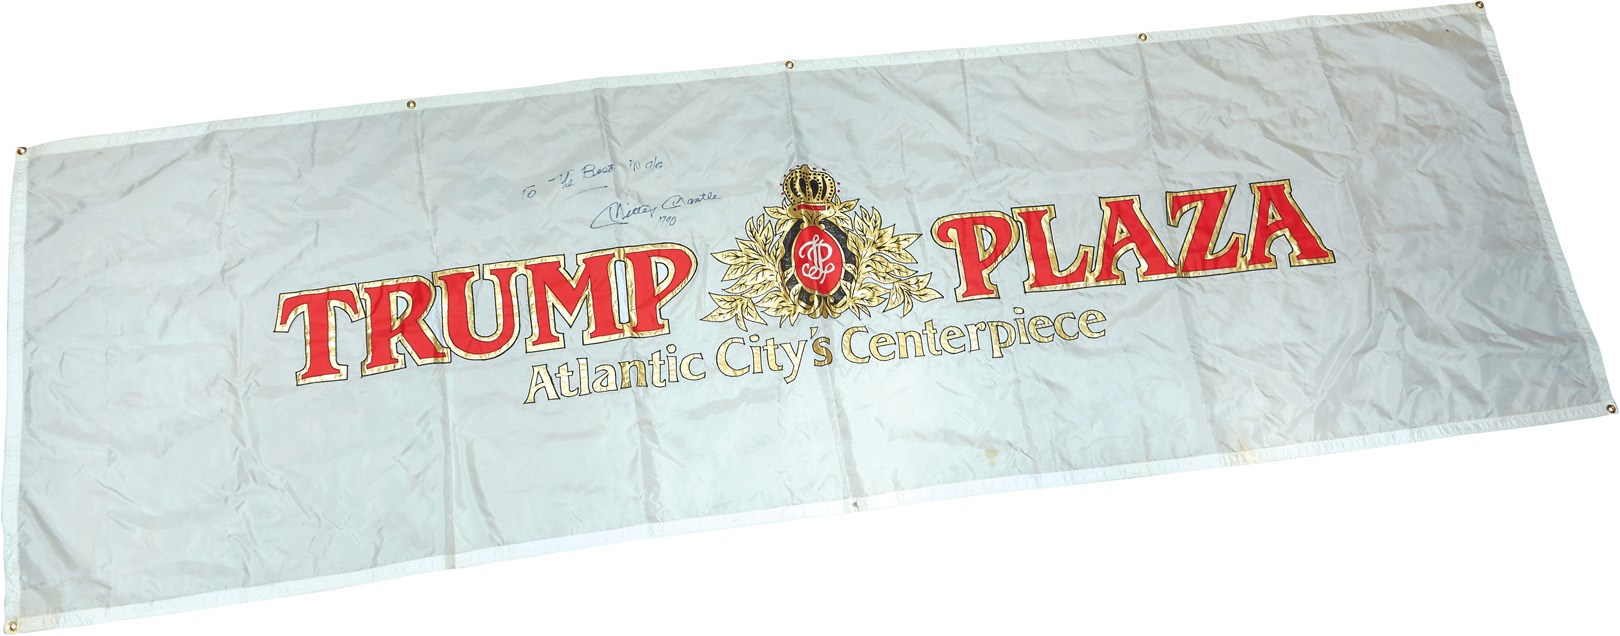 - 1990 Mickey Mantle Signed Trump Plaza Banner